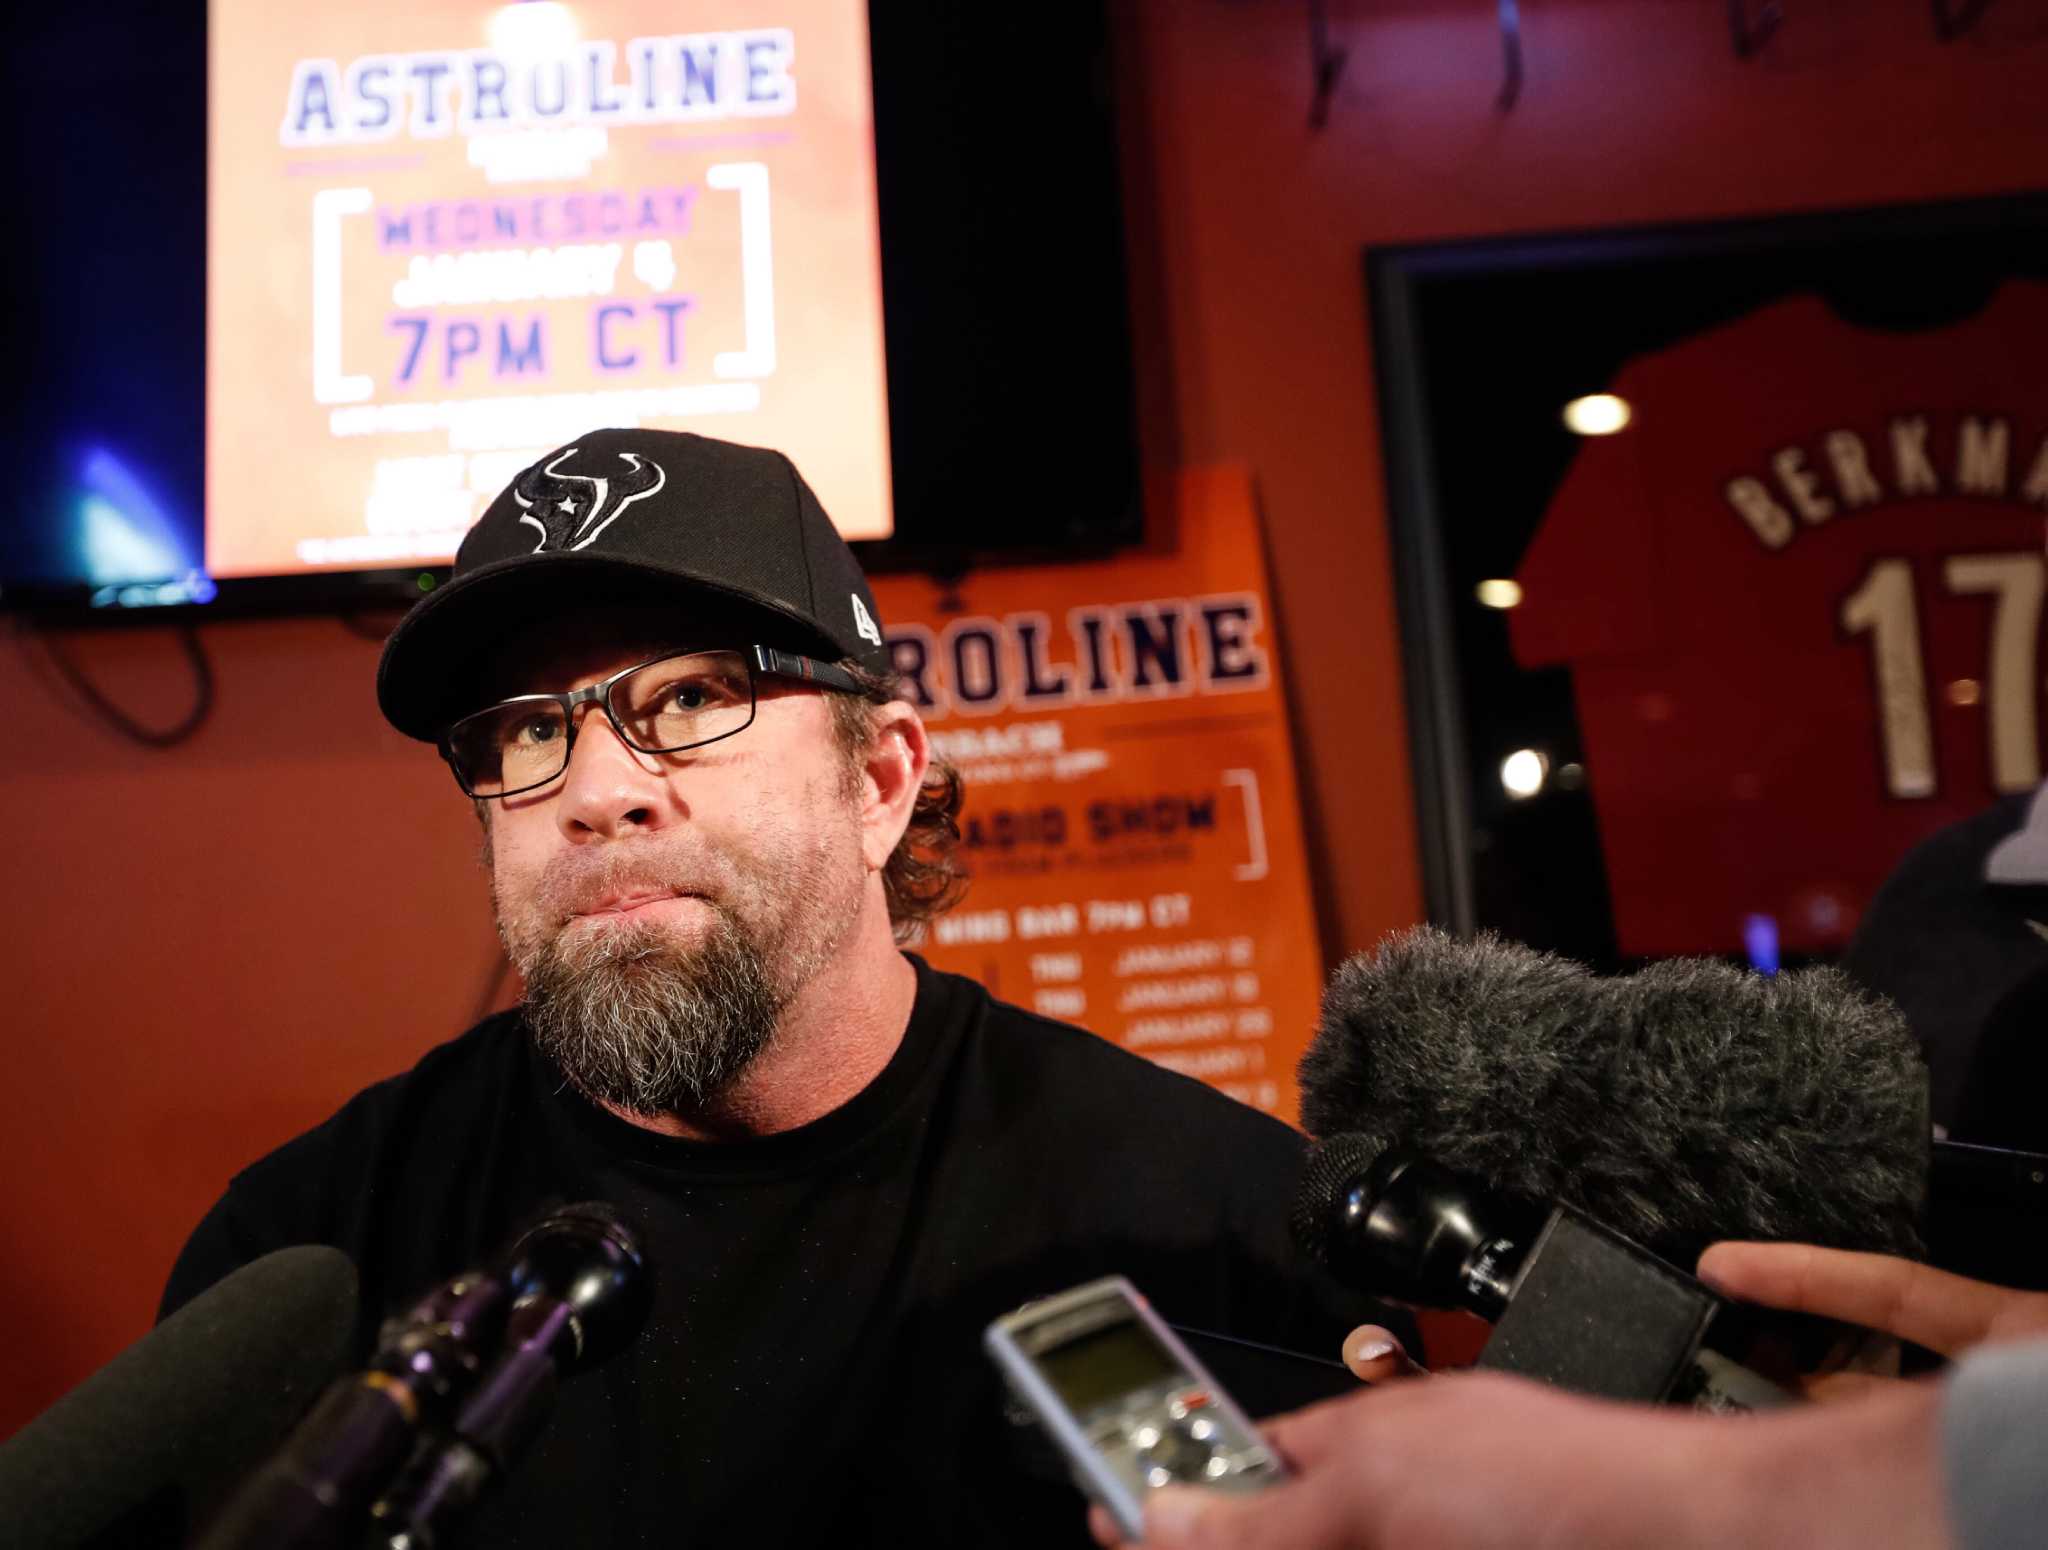 BASEBALL: Bagwell's Hall of Fame wait likely to end after 7 years